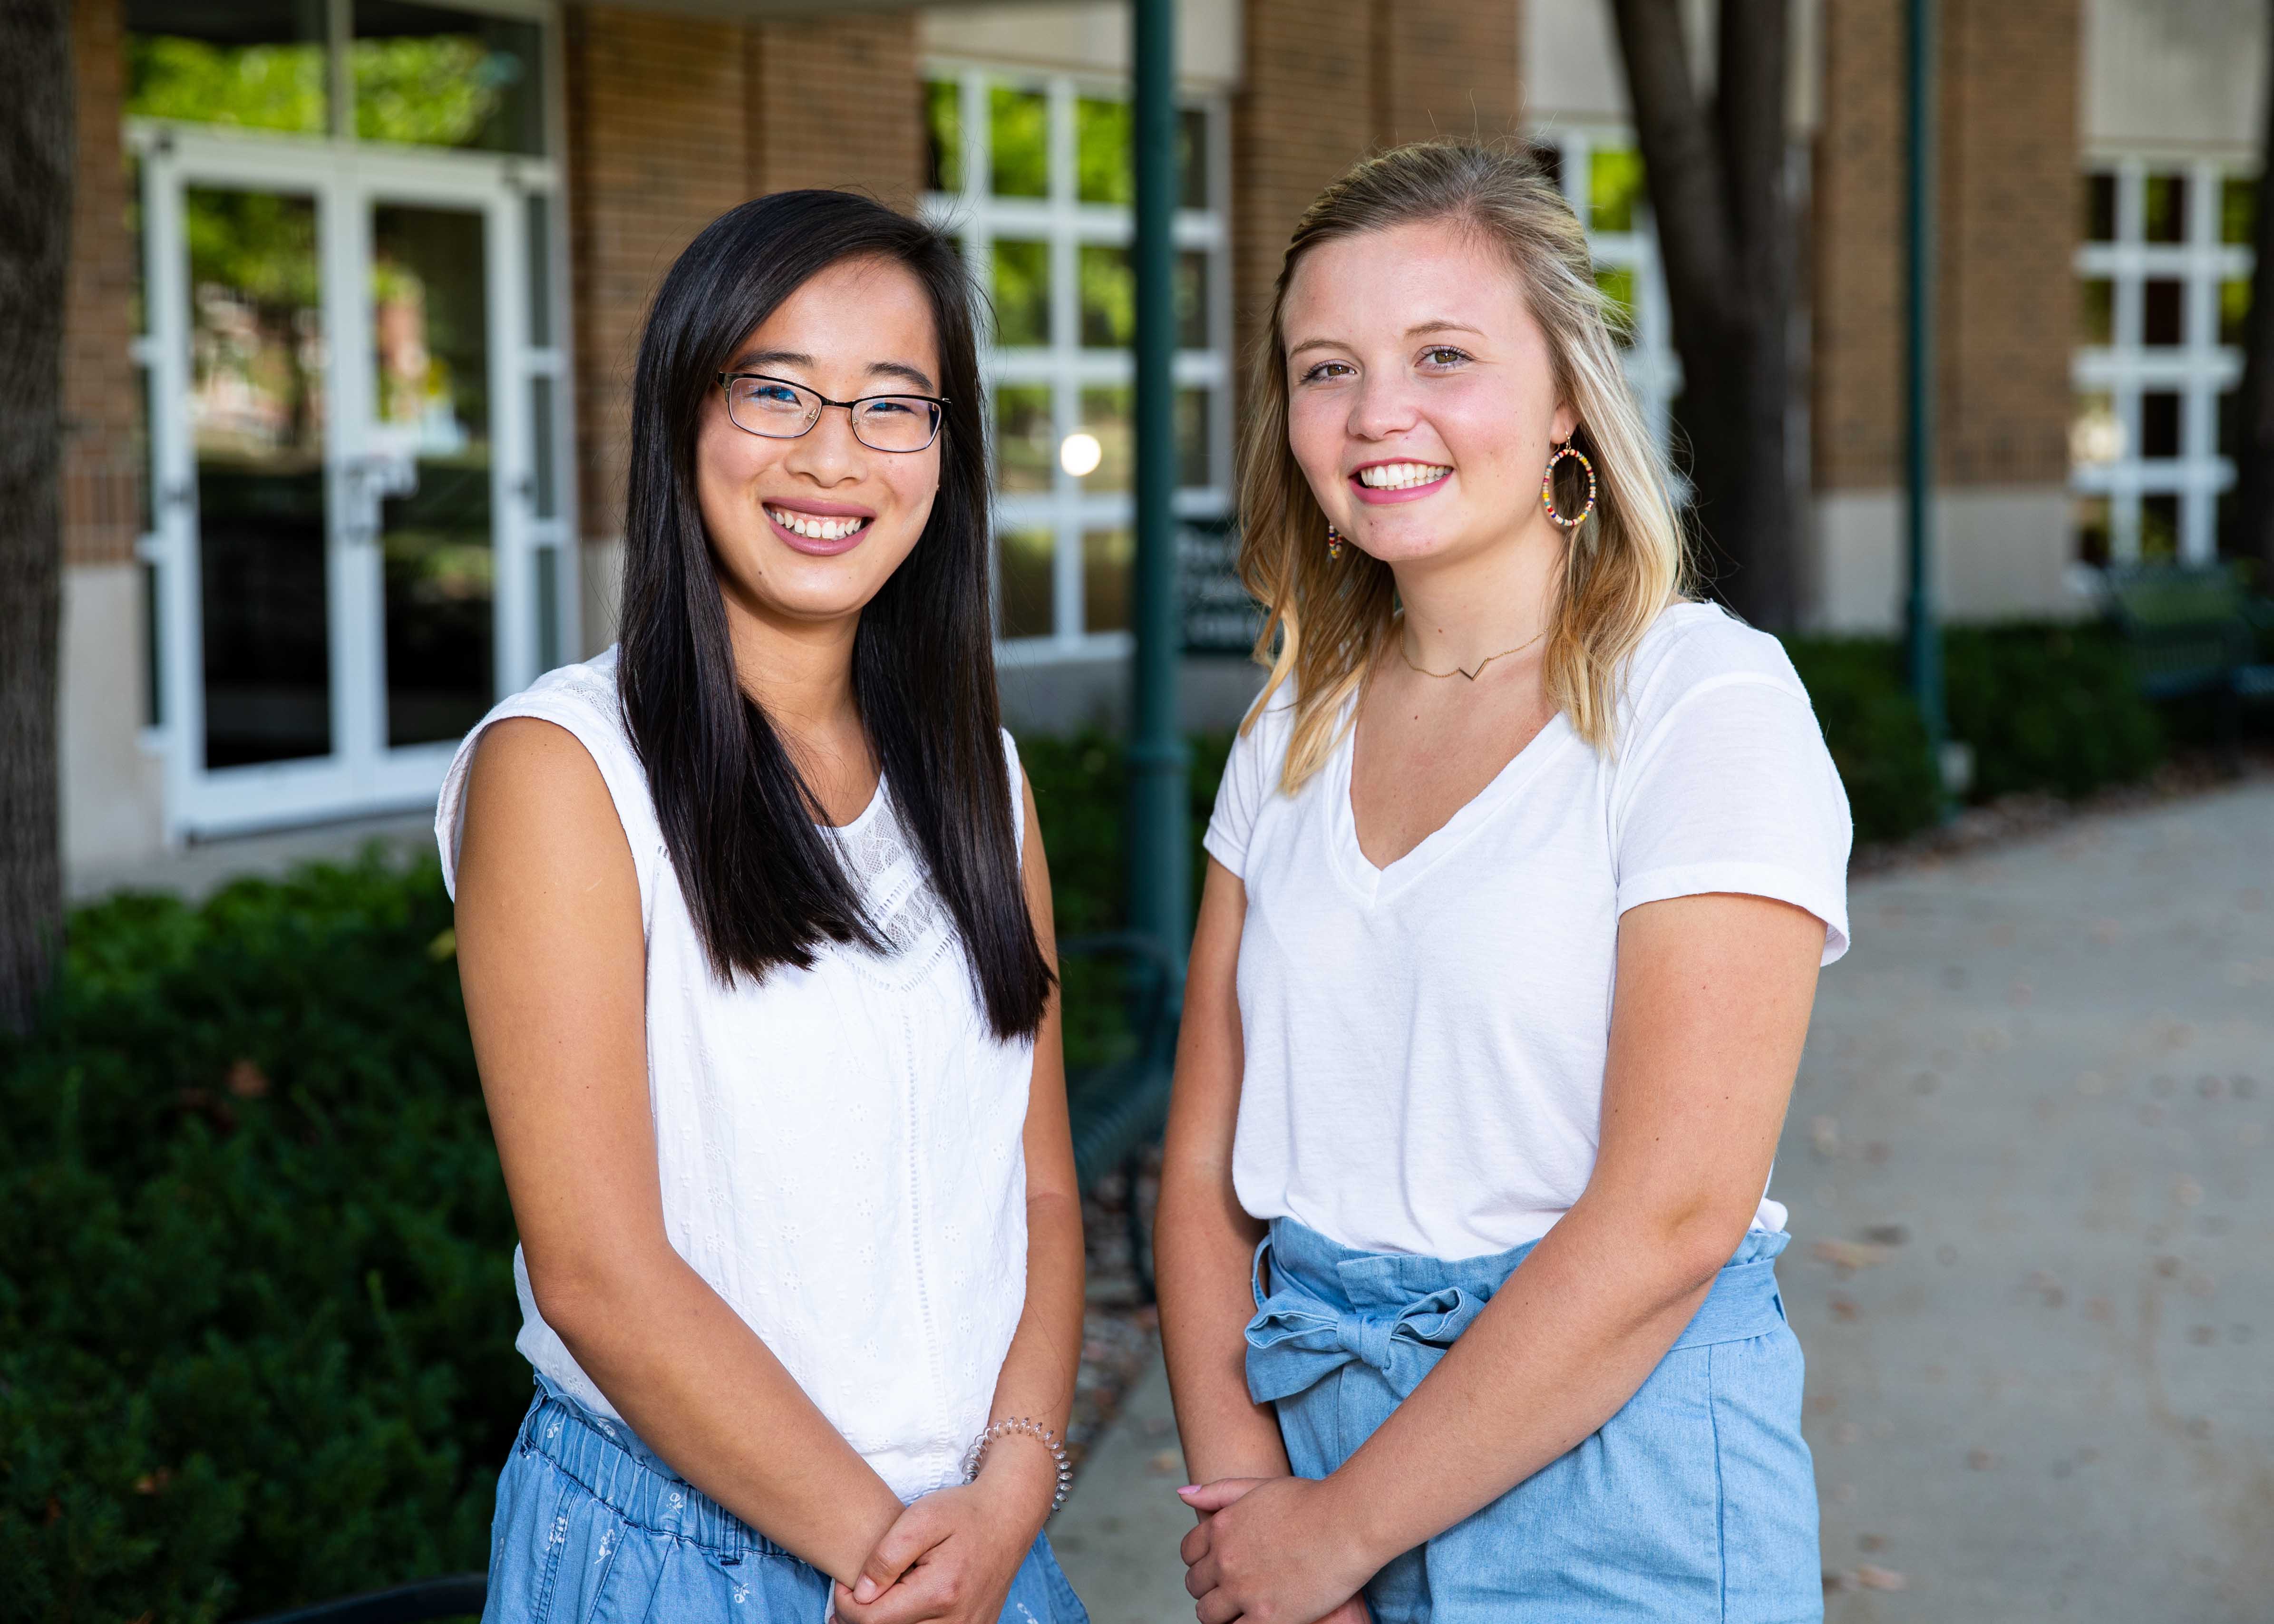 Wartburg students win lesson plan writing competition Wartburg College